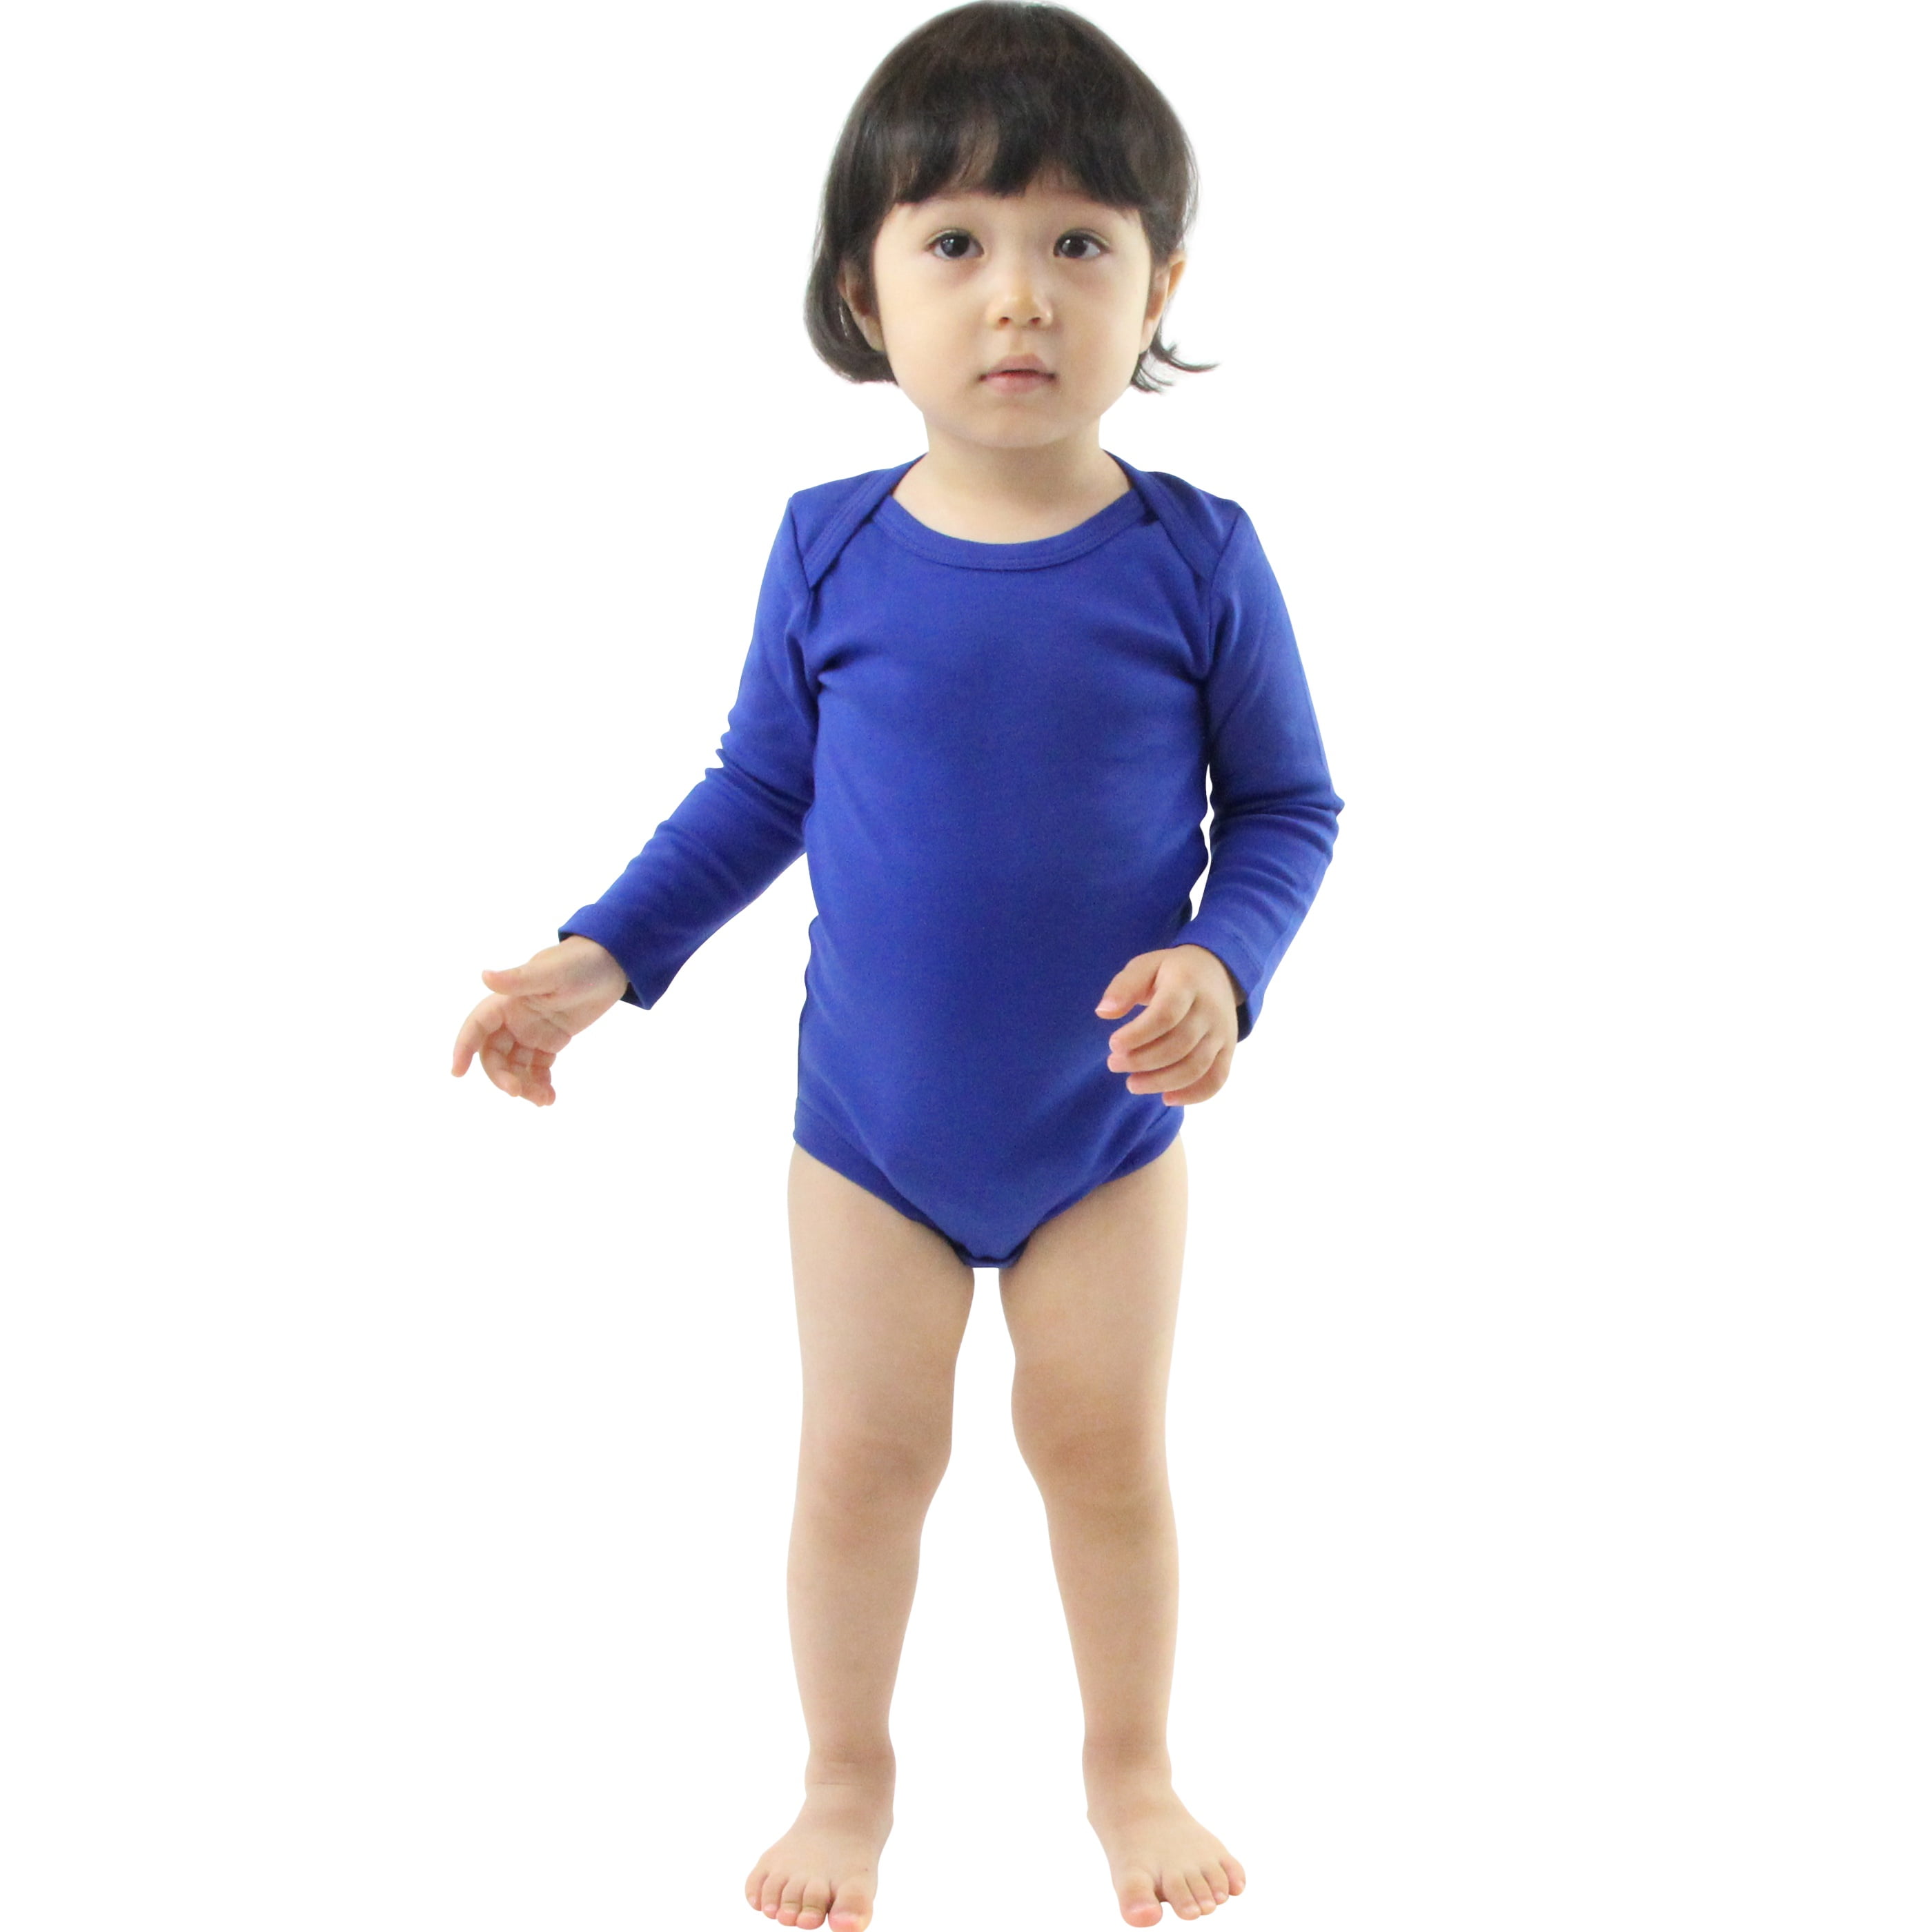 KAYERDELLE Thin Blue Line Heart Long Sleeve Unisex Baby Bodysuits for 6-24 Months Toddler 